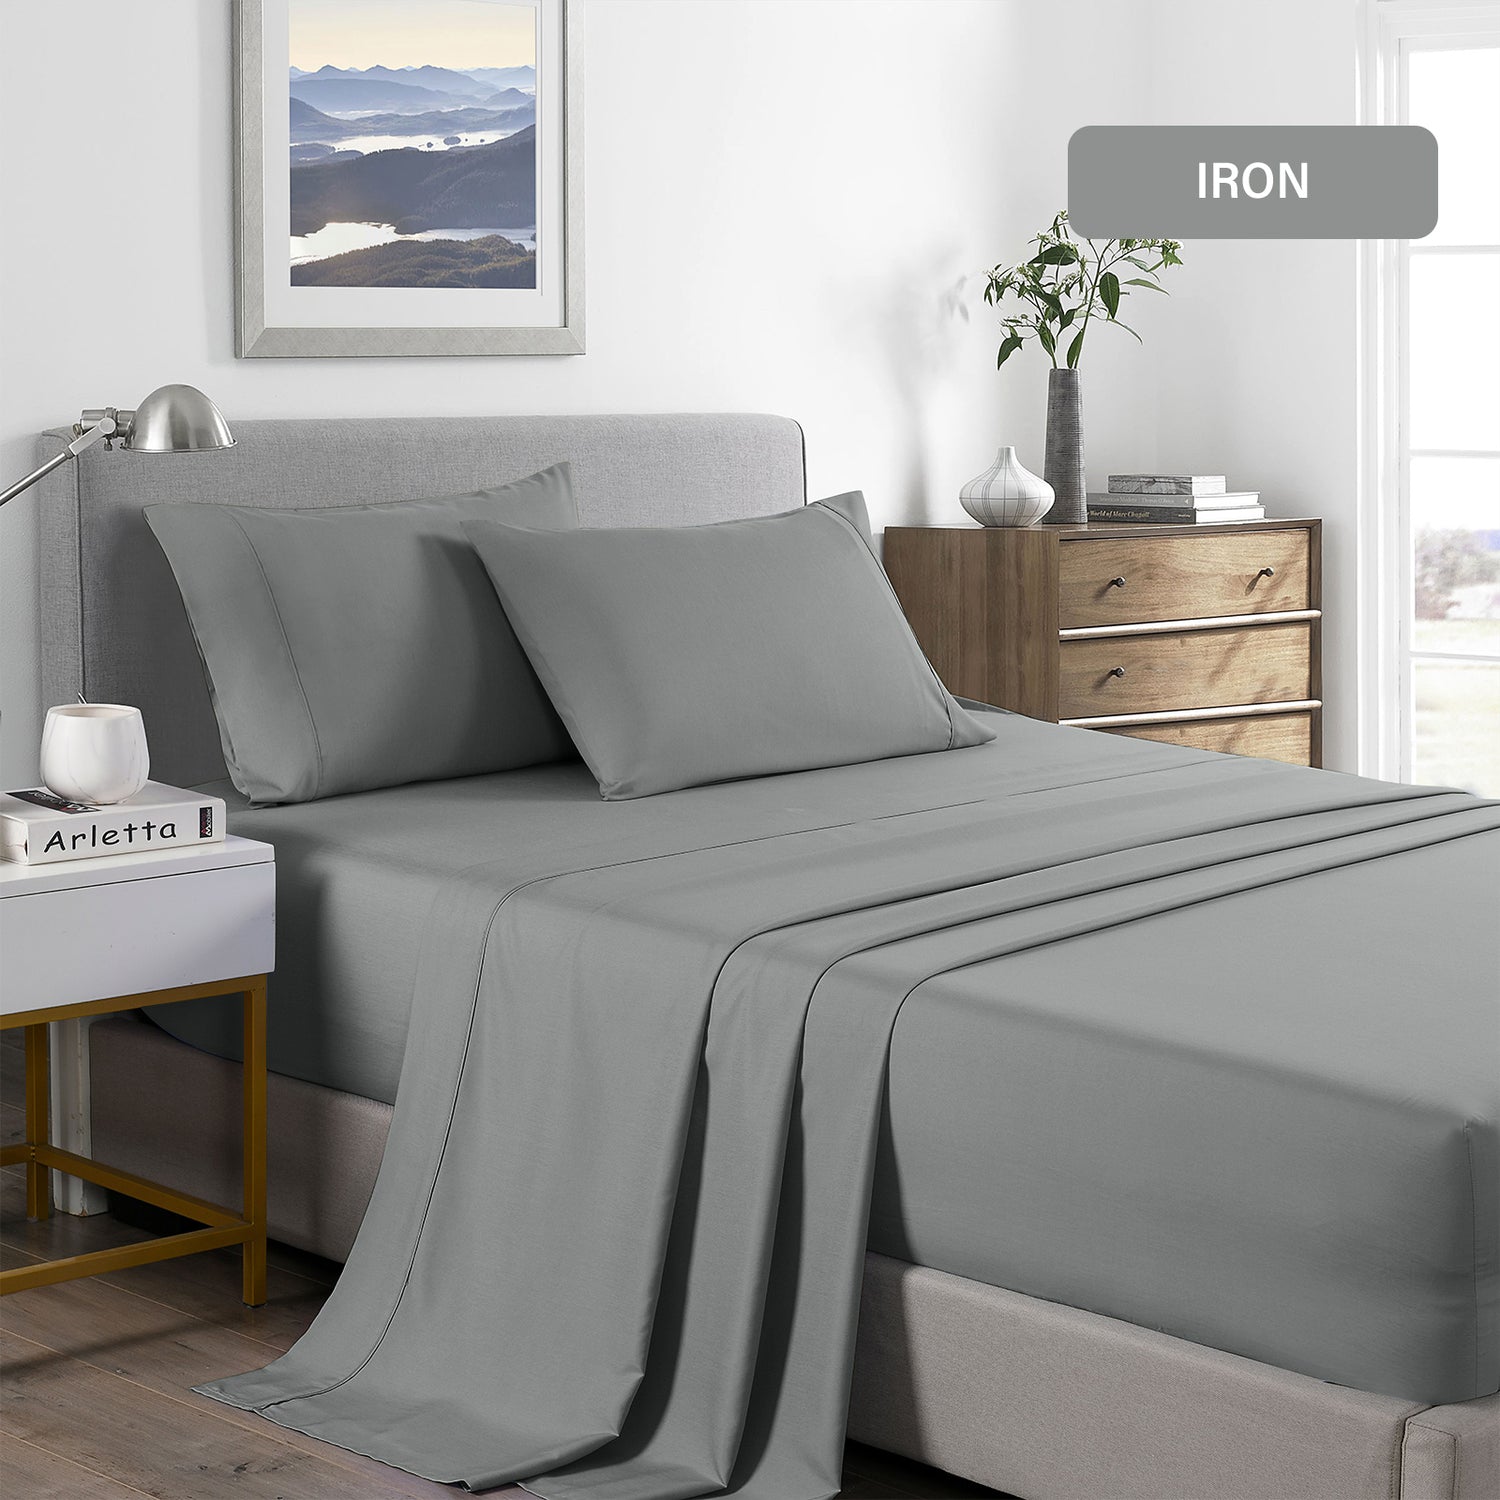 Royal Comfort 2000 Thread Count Bamboo Cooling Sheet Set Ultra Soft Bedding-Bed Linen-PEROZ Accessories